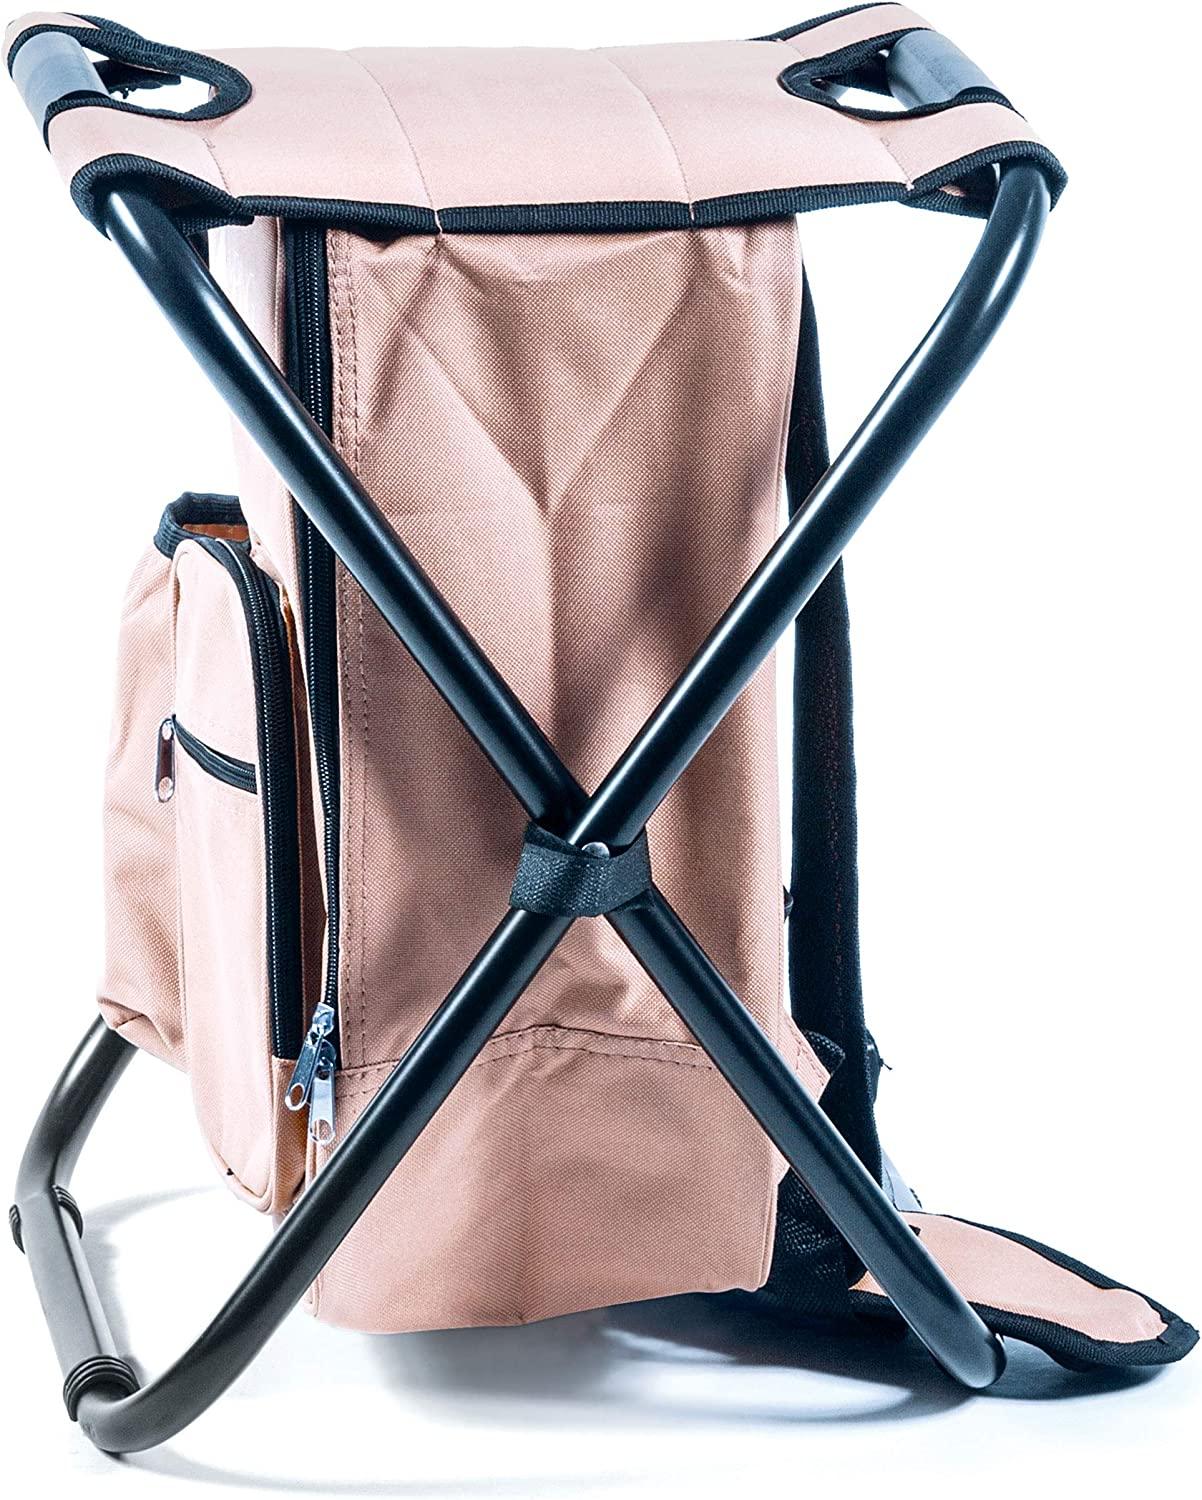 Portable Backpack Stool - Pink - CozyBuys